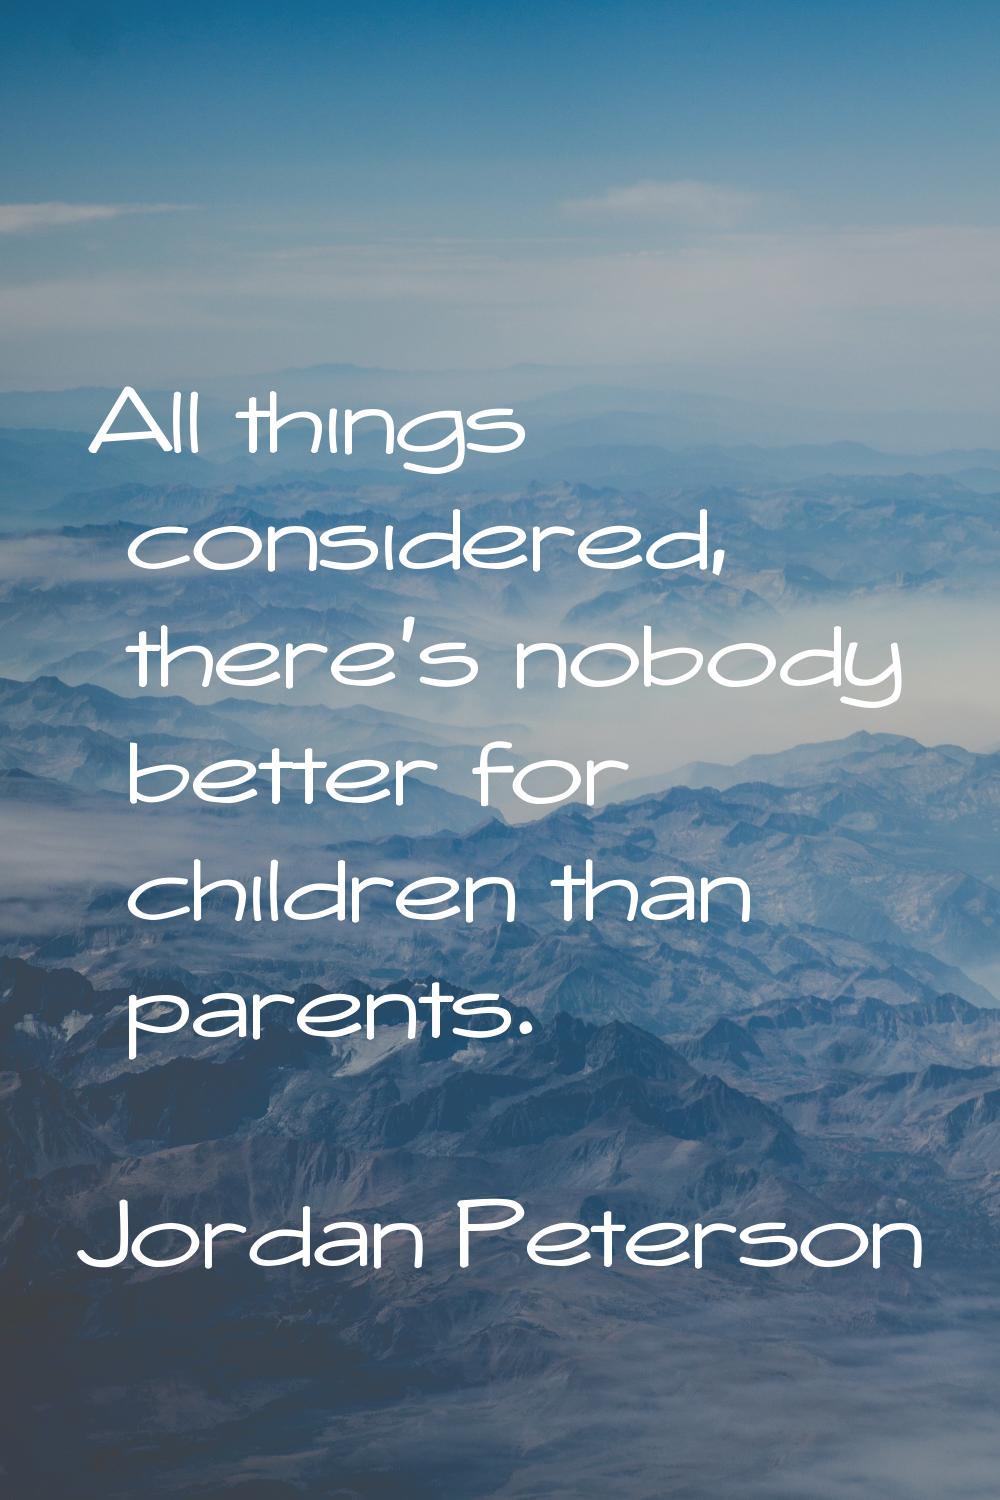 All things considered, there's nobody better for children than parents.